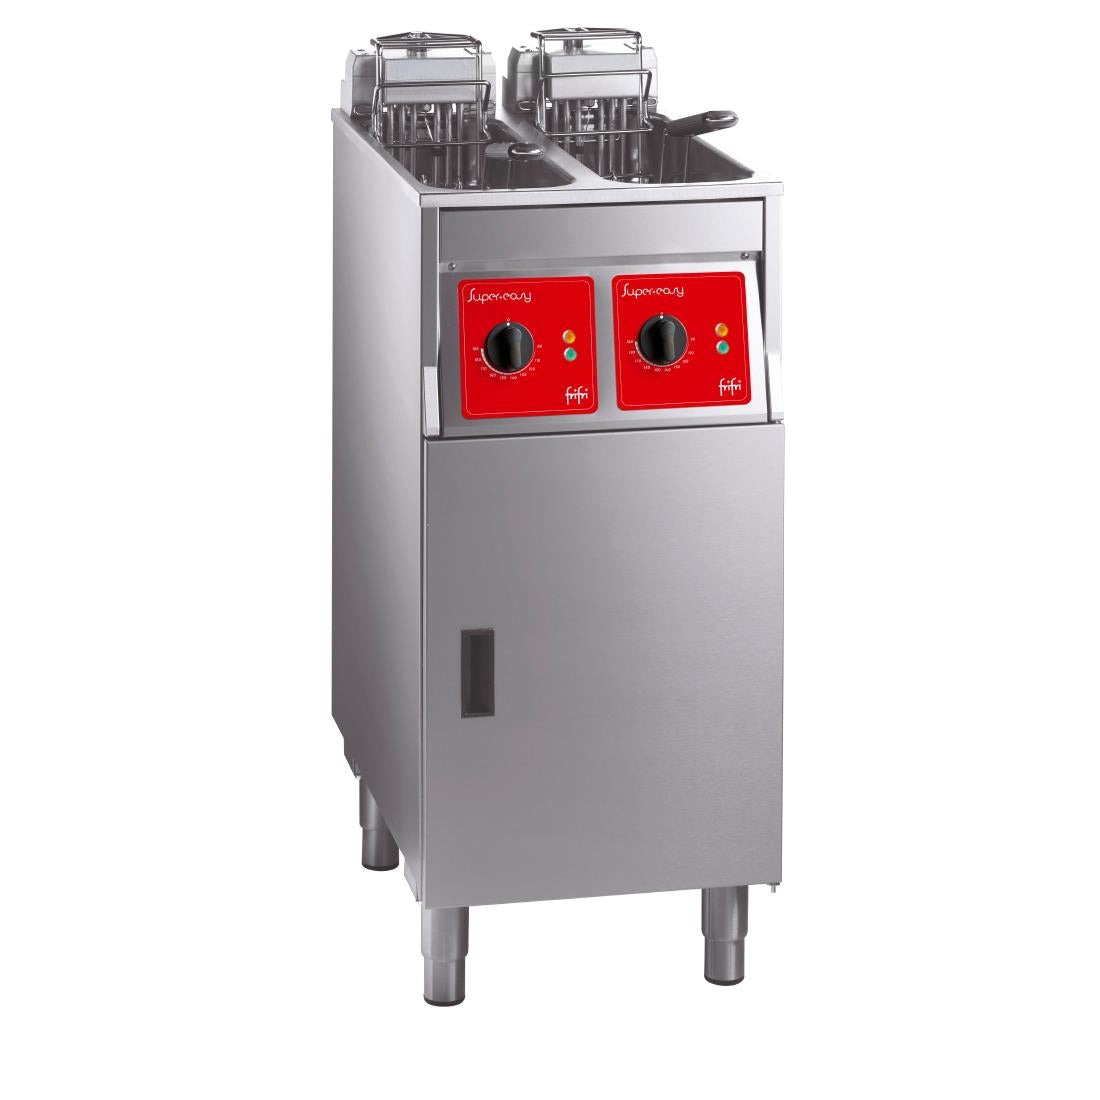 HS064-3PH FriFri Super Easy 422 Electric Free-Standing Twin Tank Fryer with Filtration 2 Baskets 2x 11kW - Three Phase